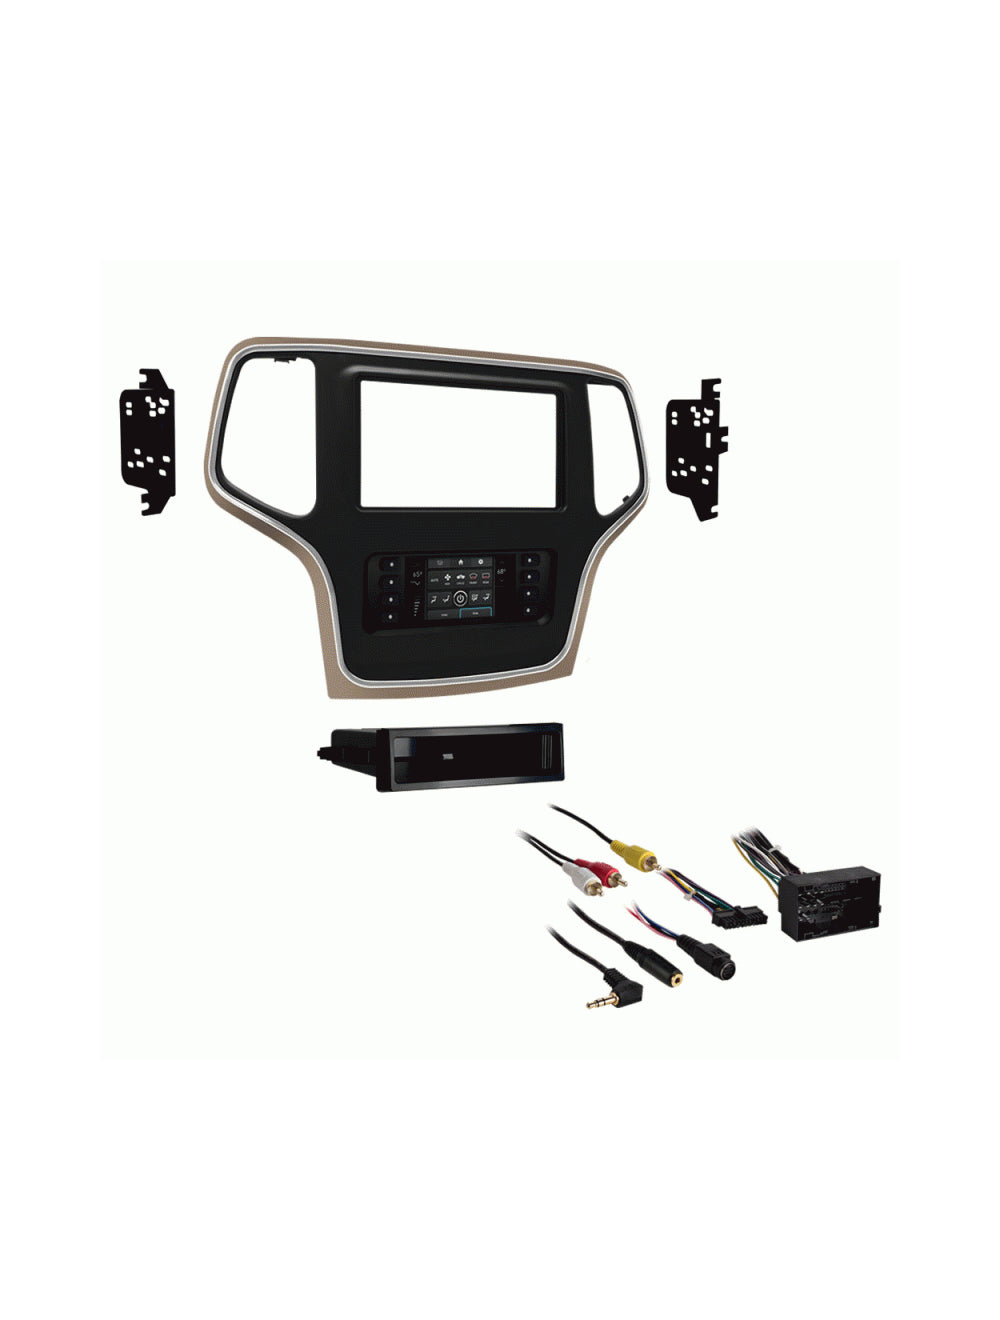 Metra 99-6536BZ Single/Double DIN Dash Kit for Select 2014-Up Jeep Grand Cherokee